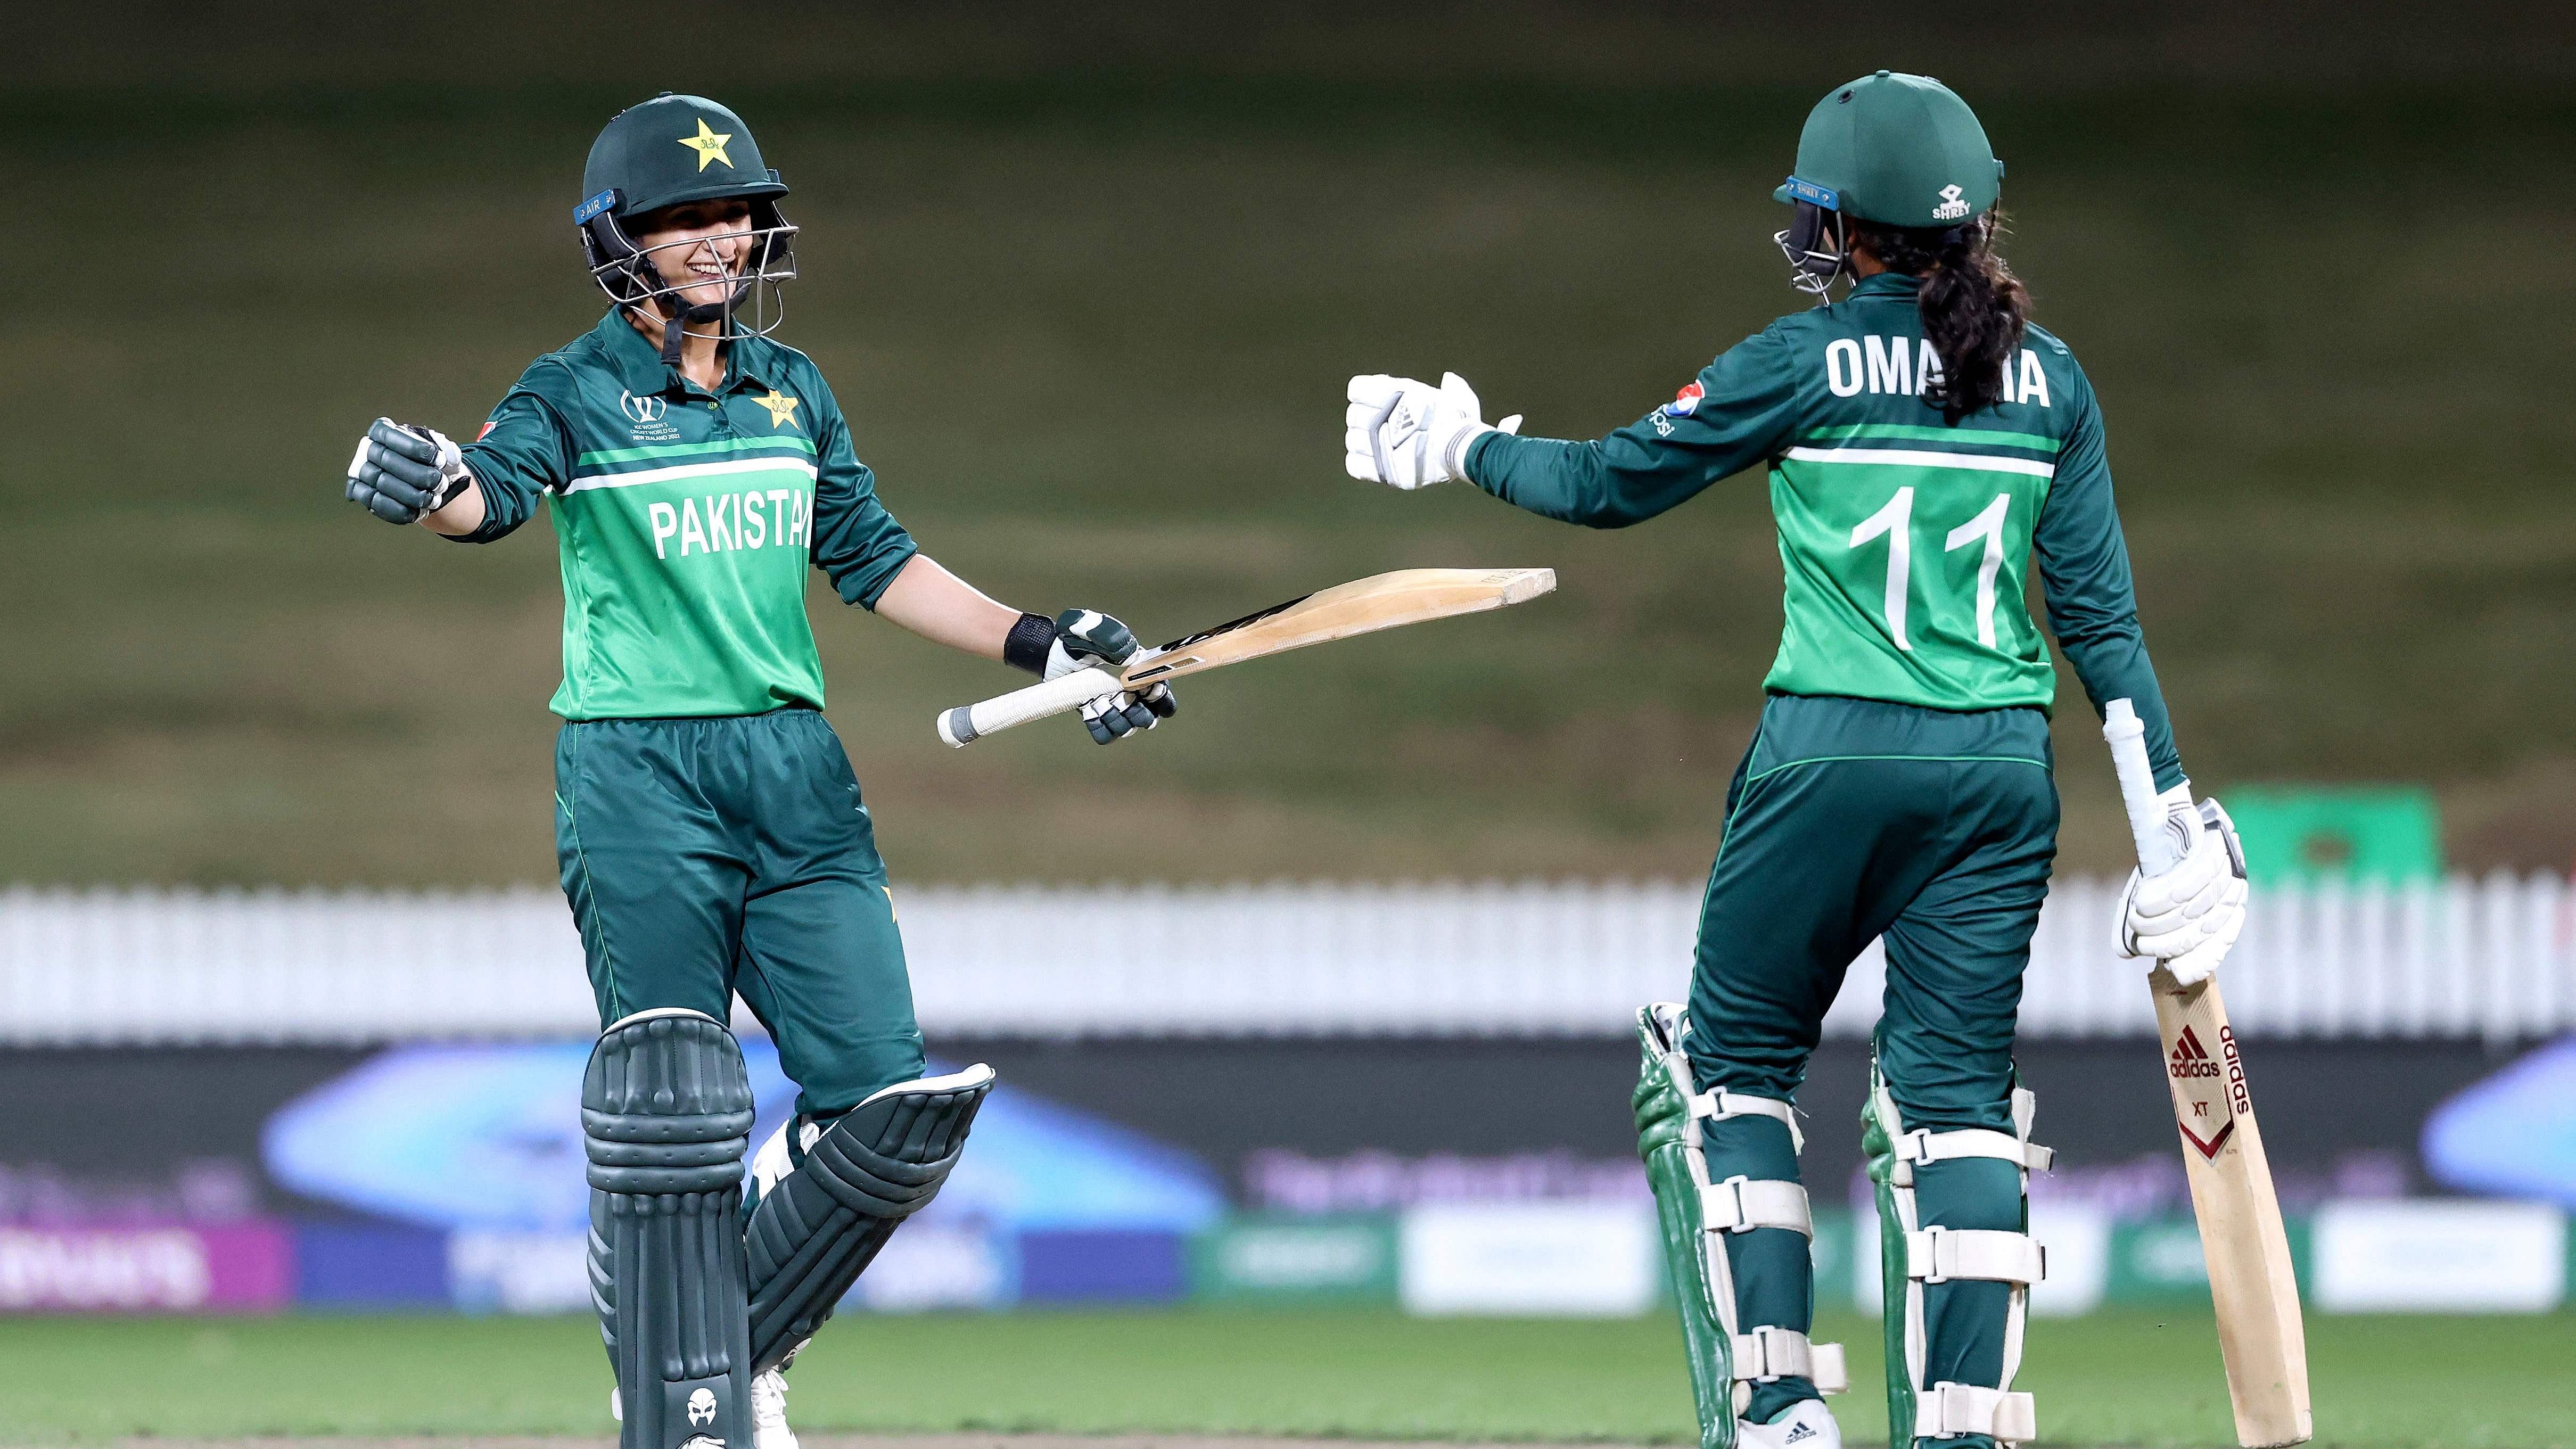 Pakistan's Bismah Maroof (L) and Omaima Sohail (R) celebrate winning the match during the 2022 Women's Cricket World Cup match between Pakistan and West Indies at Seddon Park. Credit: AFP Photo